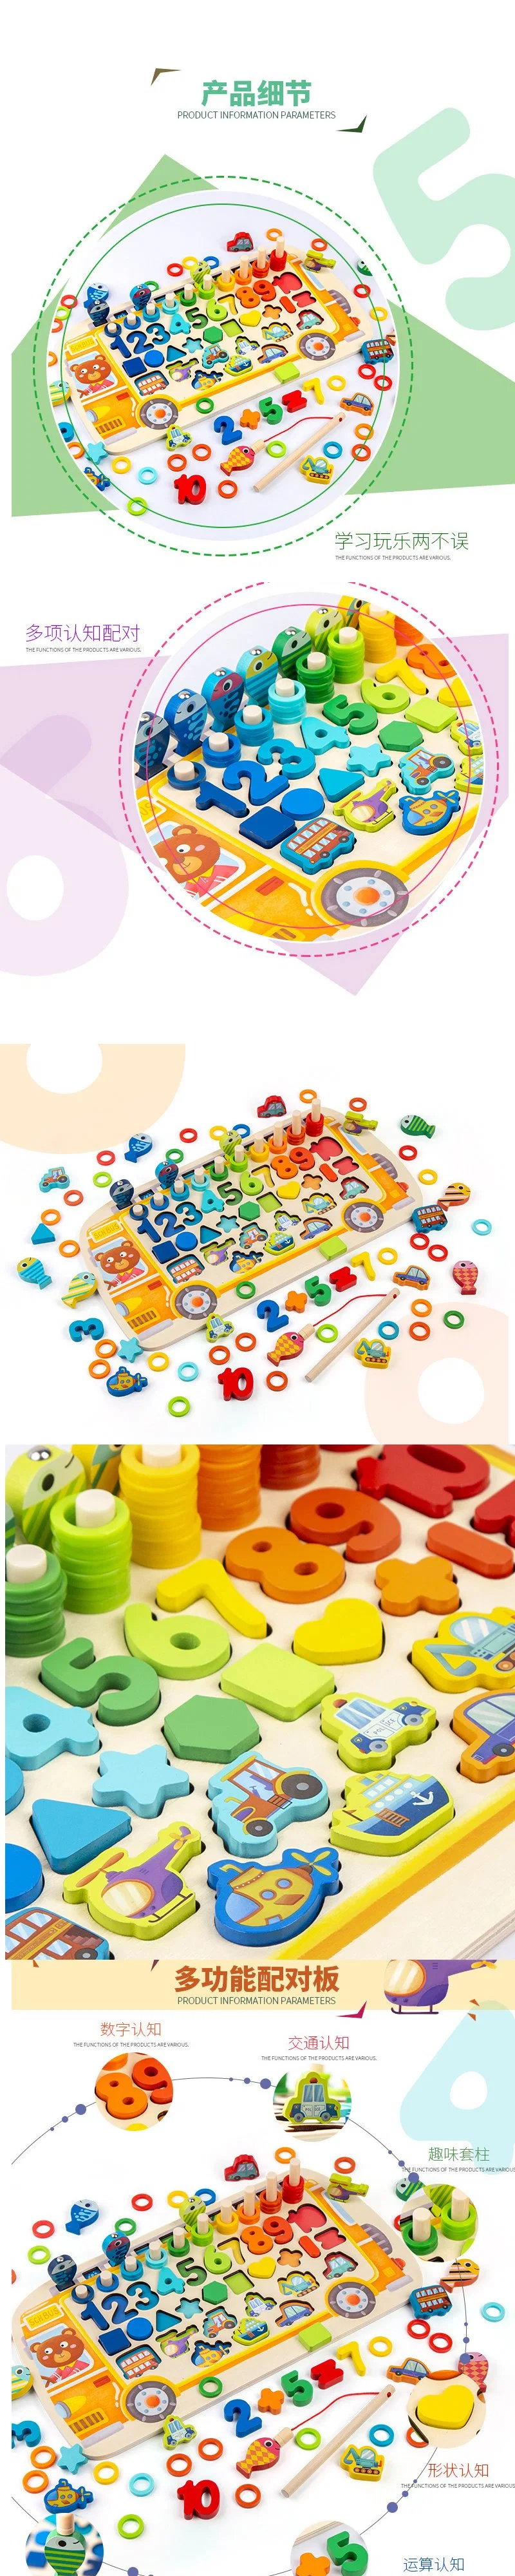 China Factory Wholesale Montessori Cheap Small Children Kids Baby Educational Wooden Toys